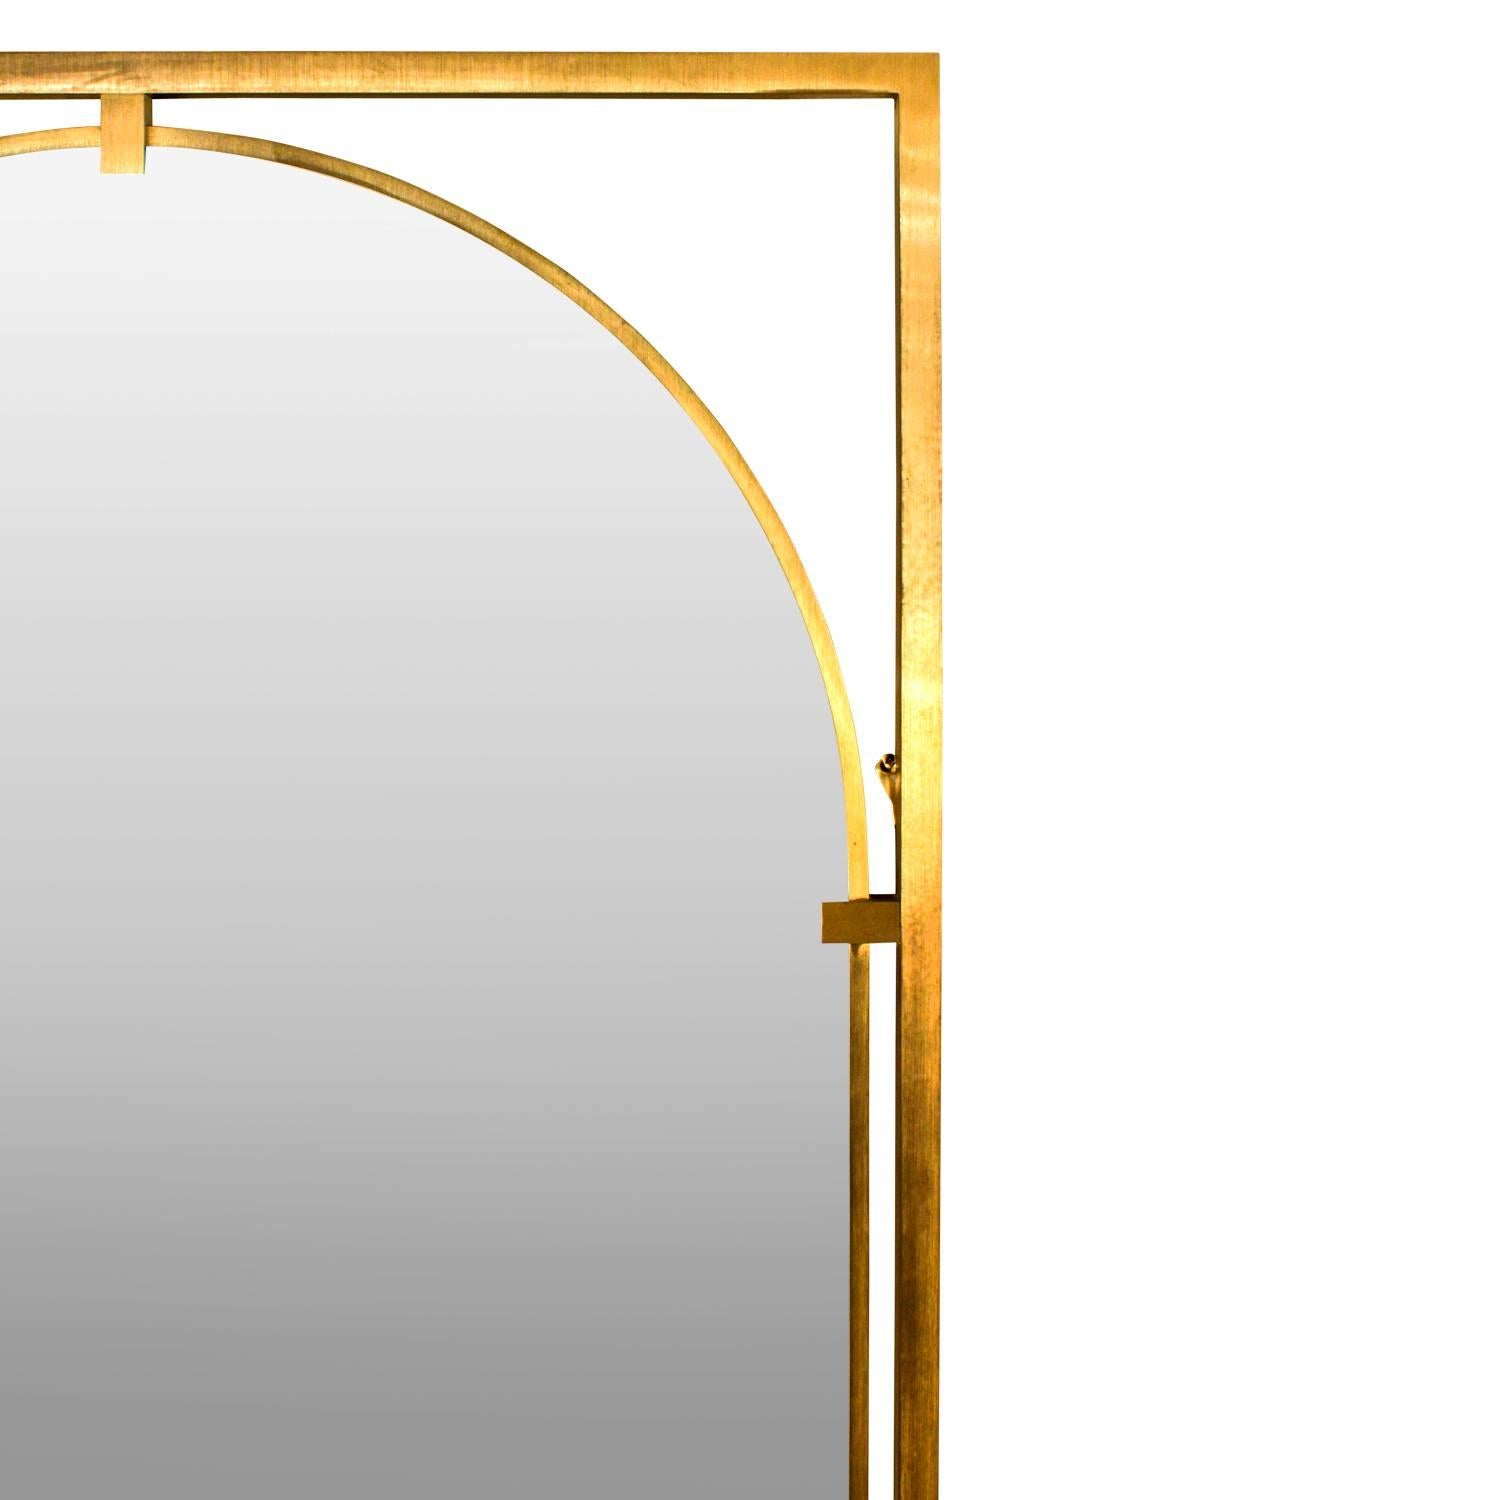 Wall hanging mirror with frame in brass and arc top design by John Widdicomb, American, 1960s.